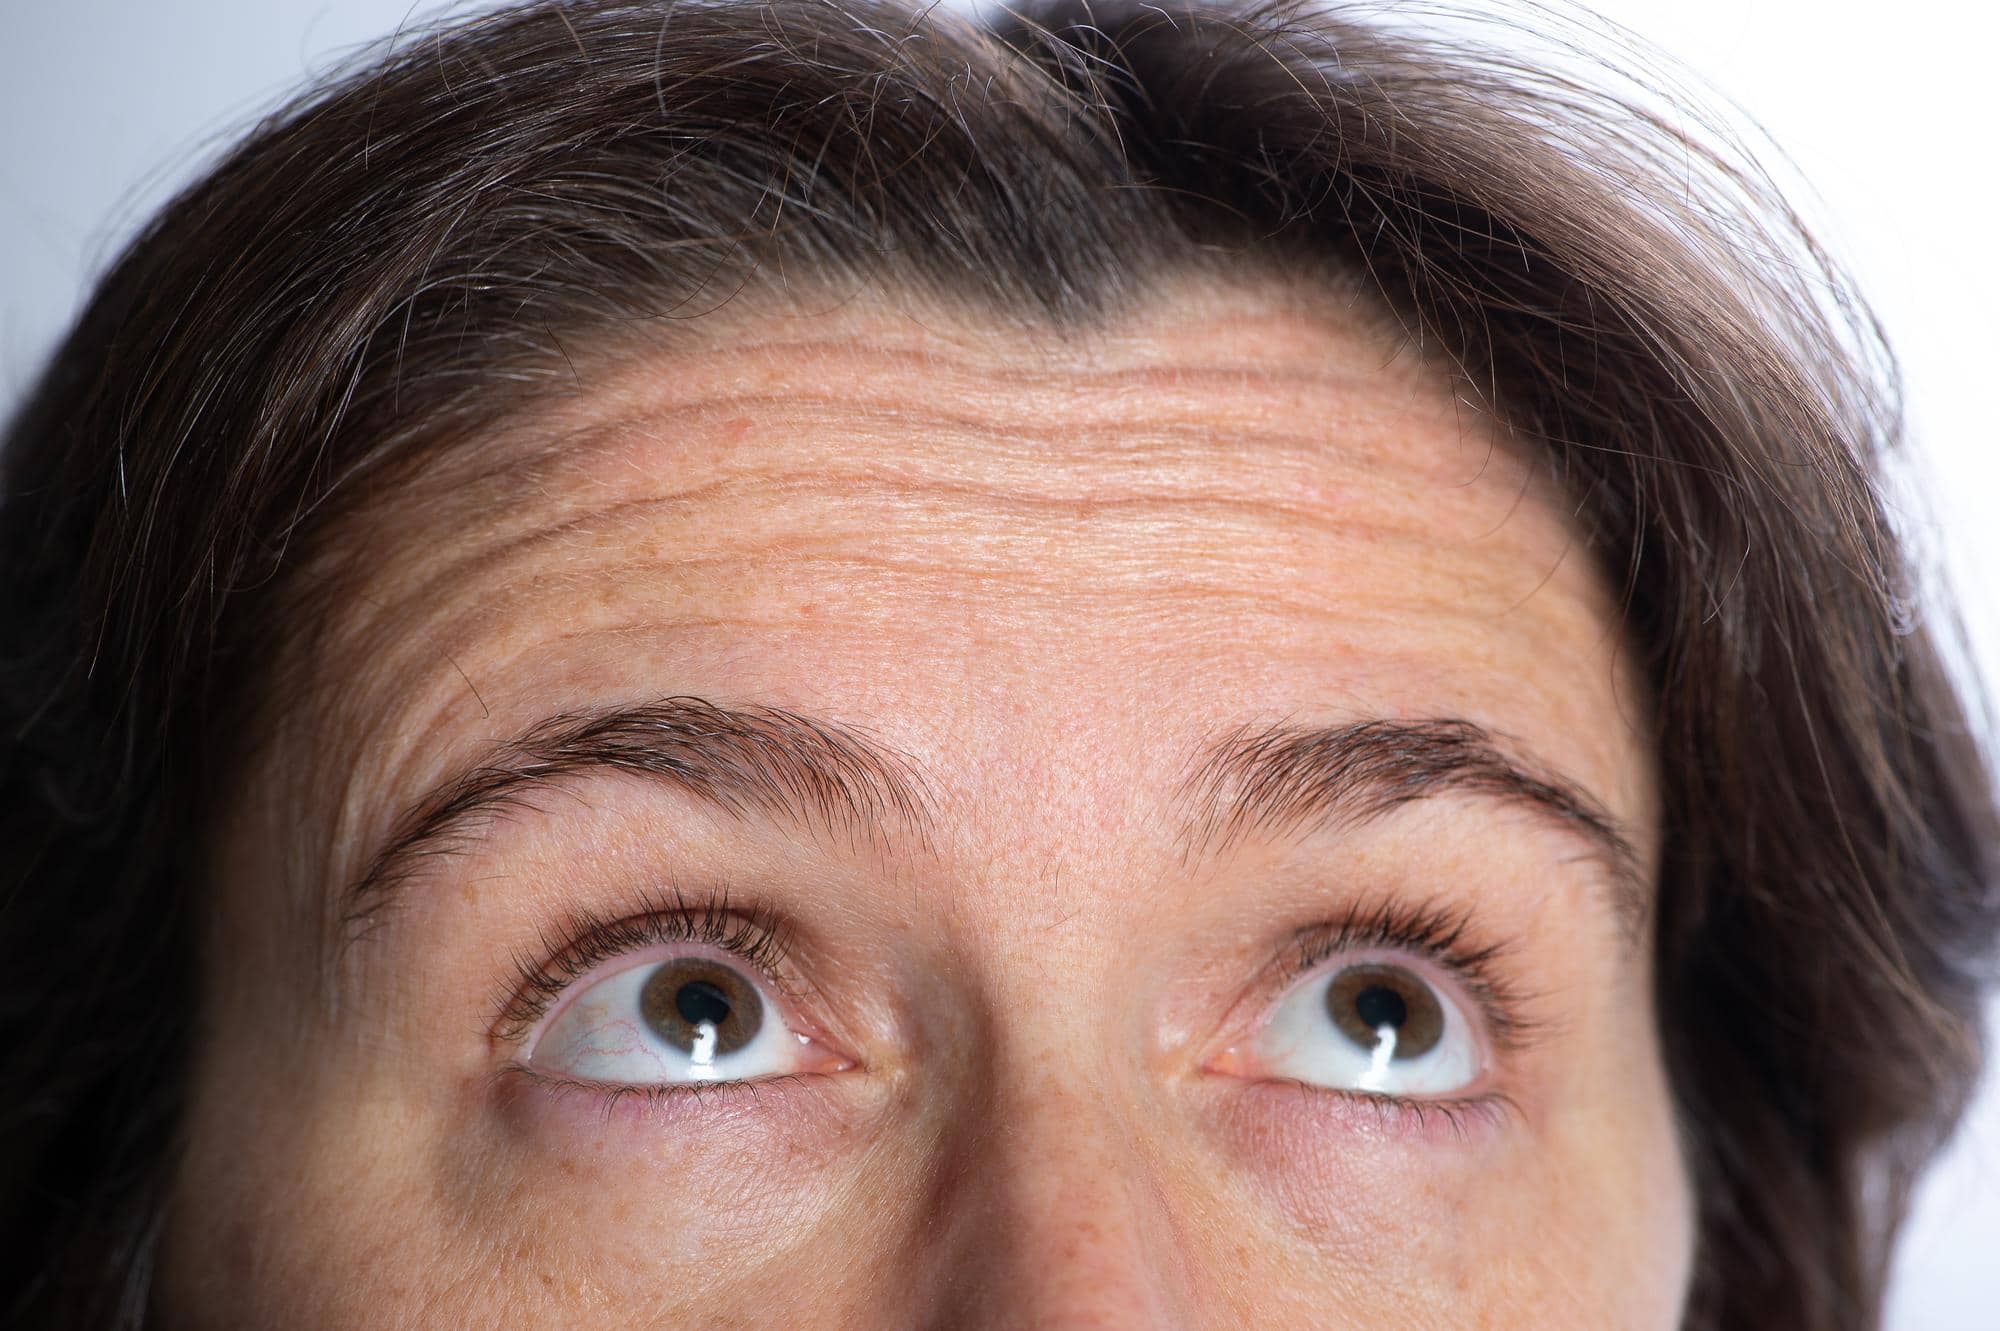 Deep wrinkles appear across the forehead of a person.